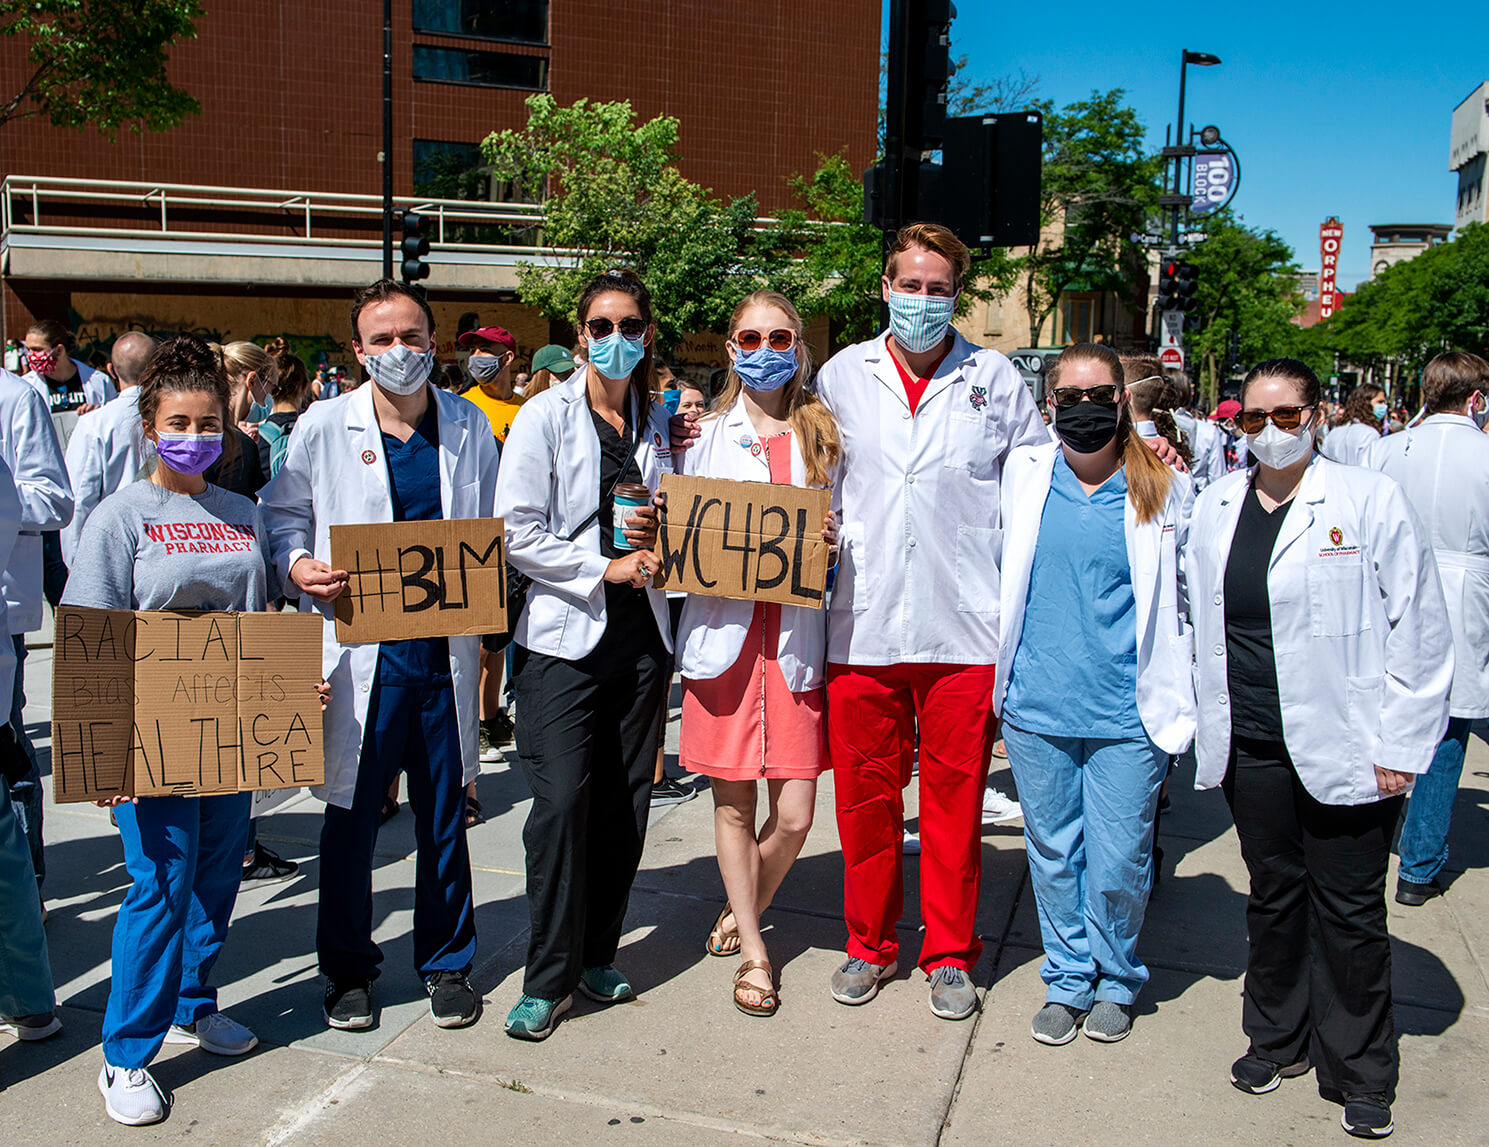 PharmD students holding in scrubs during white coats for black lives march